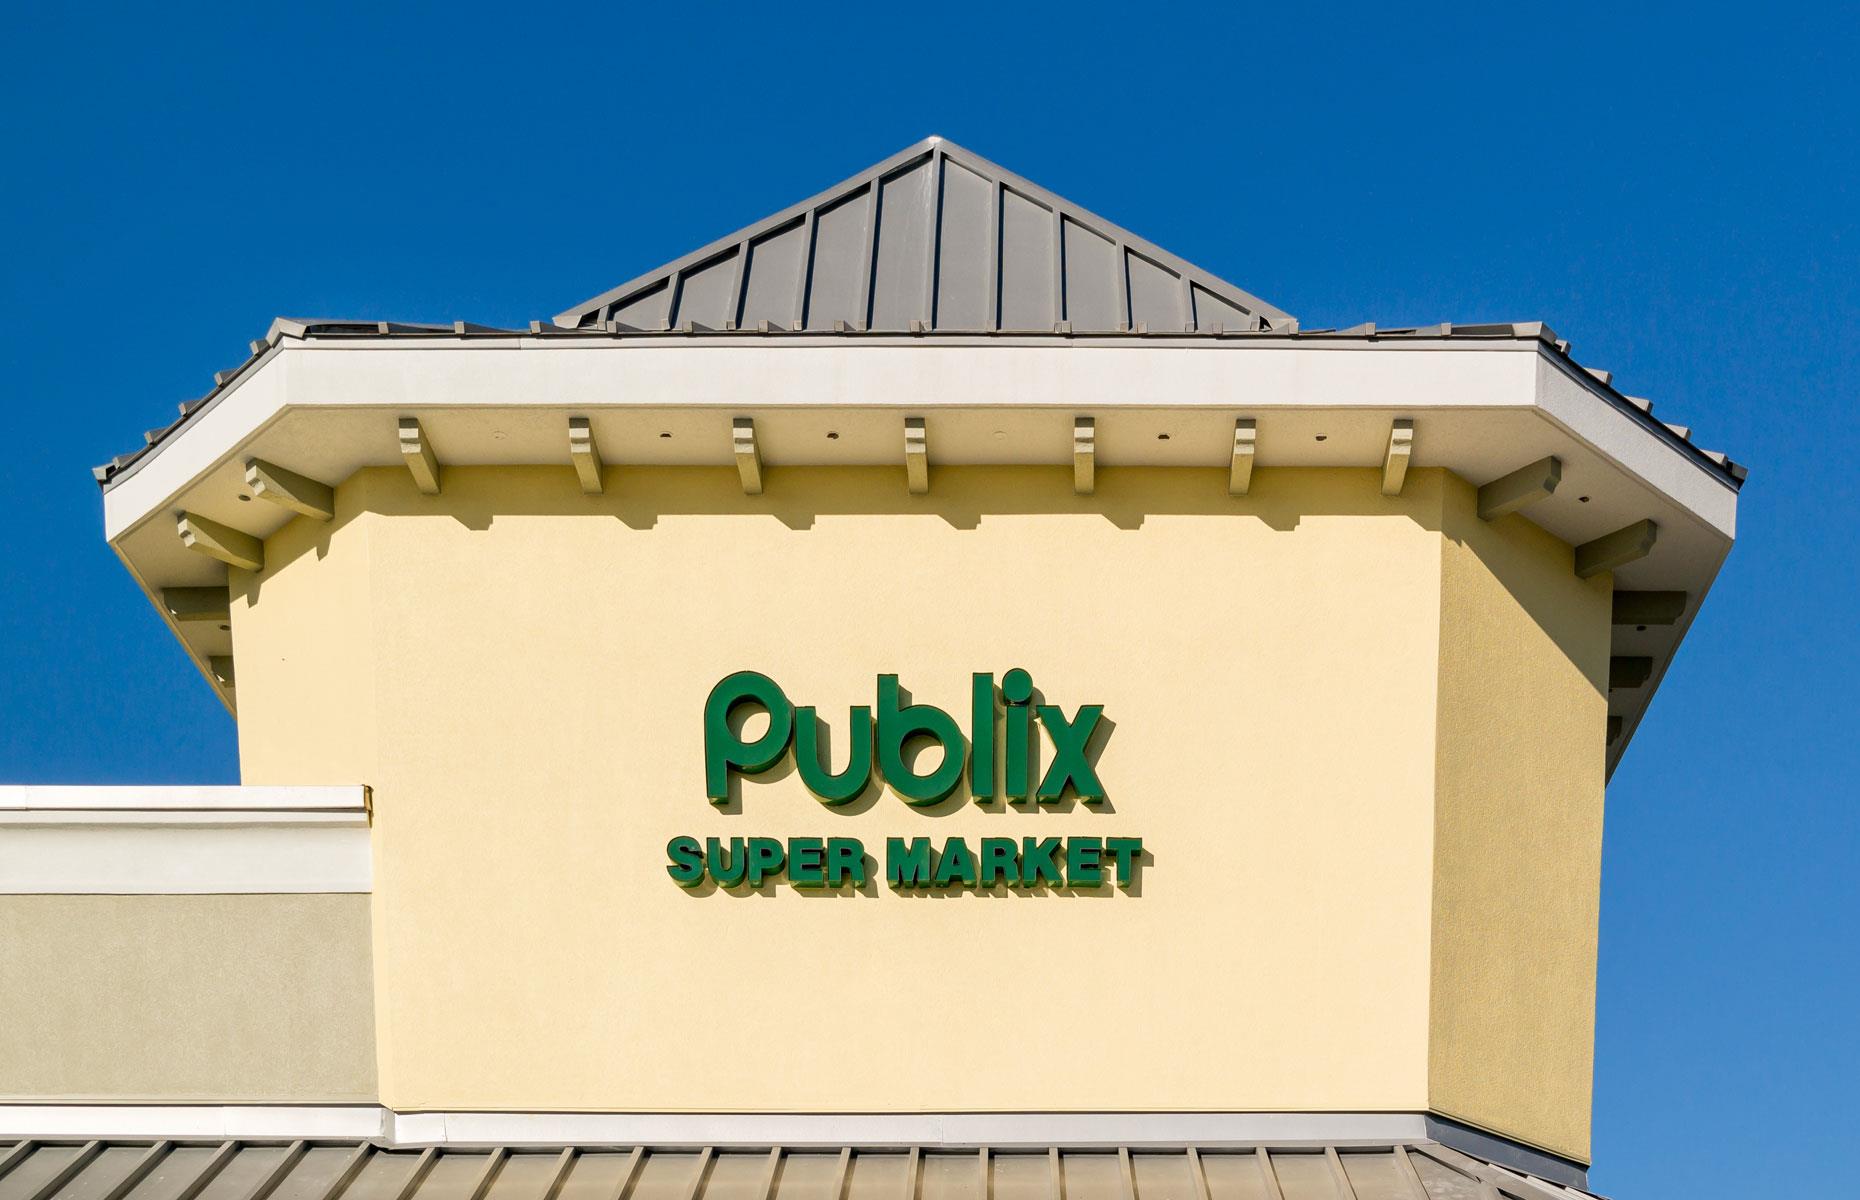 1959 – Publix: $1,000 invested then is worth $4 million (£2.7m) today